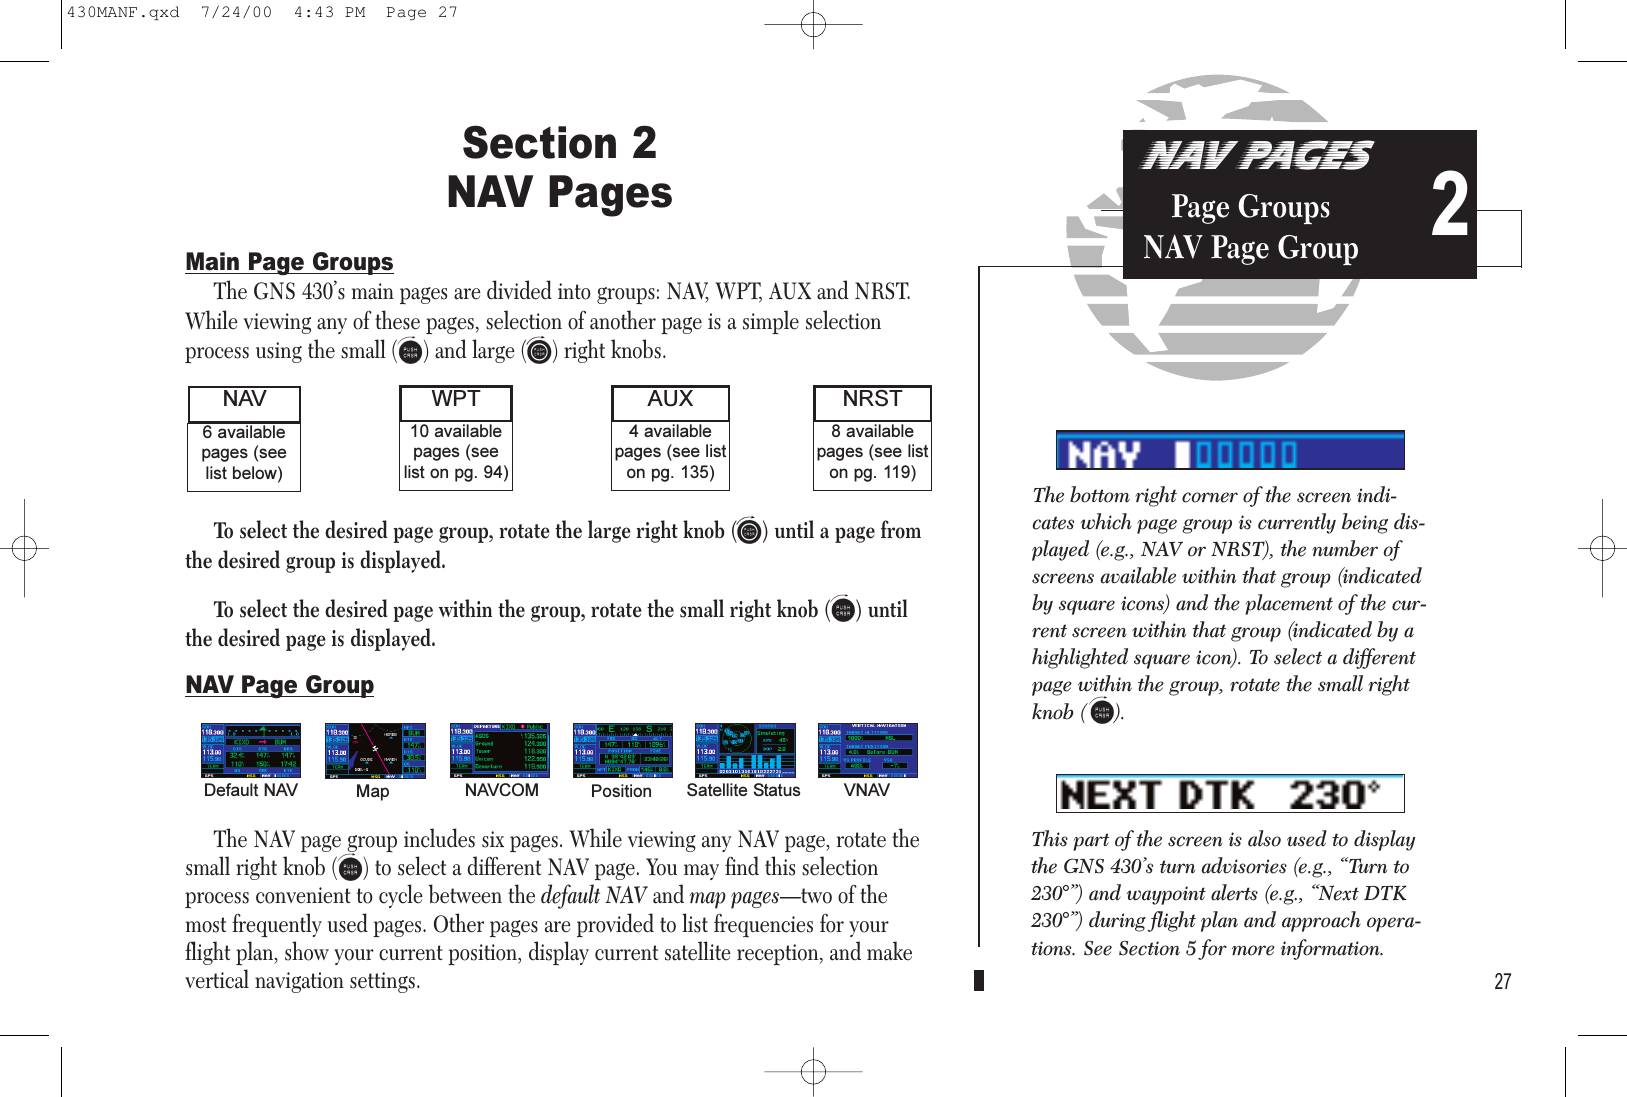 NAV PAGESPage GroupsNAV Page Group 227Section 2 NAV PagesMain Page GroupsThe GNS 430’s main pages are divided into groups: NAV, WPT, AUX and NRST.While viewing any of these pages, selection of another page is a simple selectionprocess using the small (a) and large (d) right knobs.To select the desired page group, rotate the large right knob (d) until a page fromthe desired group is displayed.To select the desired page within the group, rotate the small right knob (a) untilthe desired page is displayed.NAV Page GroupThe NAV page group includes six pages. While viewing any NAV page, rotate thesmall right knob (a) to select a different NAV page. You may find this selectionprocess convenient to cycle between the default NAV and map pages—two of themost frequently used pages. Other pages are provided to list frequencies for yourflight plan, show your current position, display current satellite reception, and makevertical navigation settings.8 availablepages (see liston pg. 119)6 availablepages (seelist below)NAV NRST10 availablepages (seelist on pg. 94)4 availablepages (see liston pg. 135)AUXWPTDefault NAV Map NAVCOM Position Satellite Status VNAVThe bottom right corner of the screen indi-cates which page group is currently being dis-played (e.g., NAV or NRST), the number ofscreens available within that group (indicatedby square icons) and the placement of the cur-rent screen within that group (indicated by ahighlighted square icon). To select a differentpage within the group, rotate the small rightknob ( a).This part of the screen is also used to displaythe GNS 430’s turn advisories (e.g., “Turn to230°”) and waypoint alerts (e.g., “Next DTK230°”) during flight plan and approach opera-tions. See Section 5 for more information. 430MANF.qxd  7/24/00  4:43 PM  Page 27